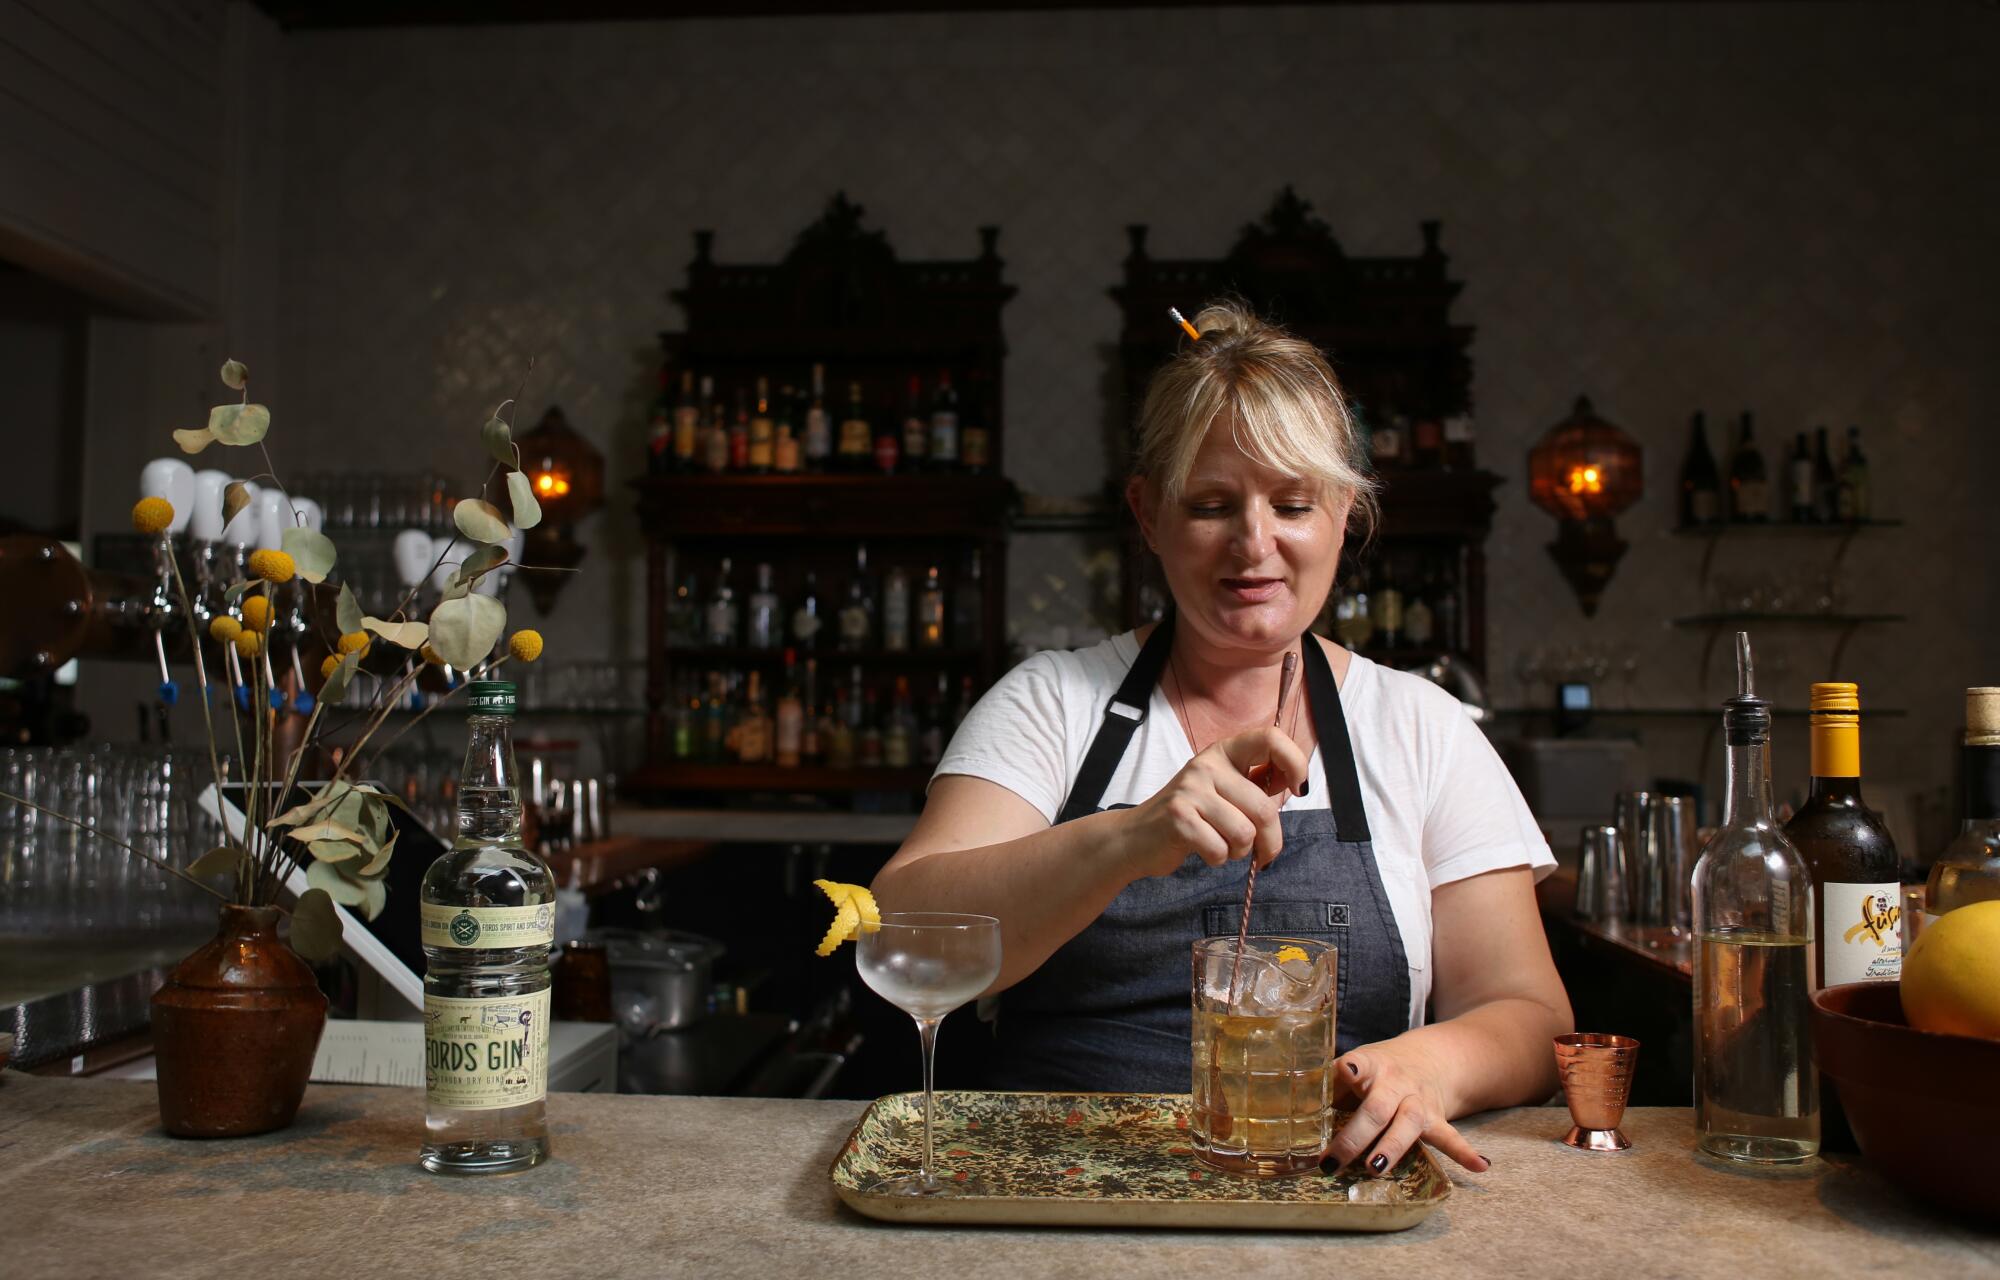 A woman stirs a drink at a bar.